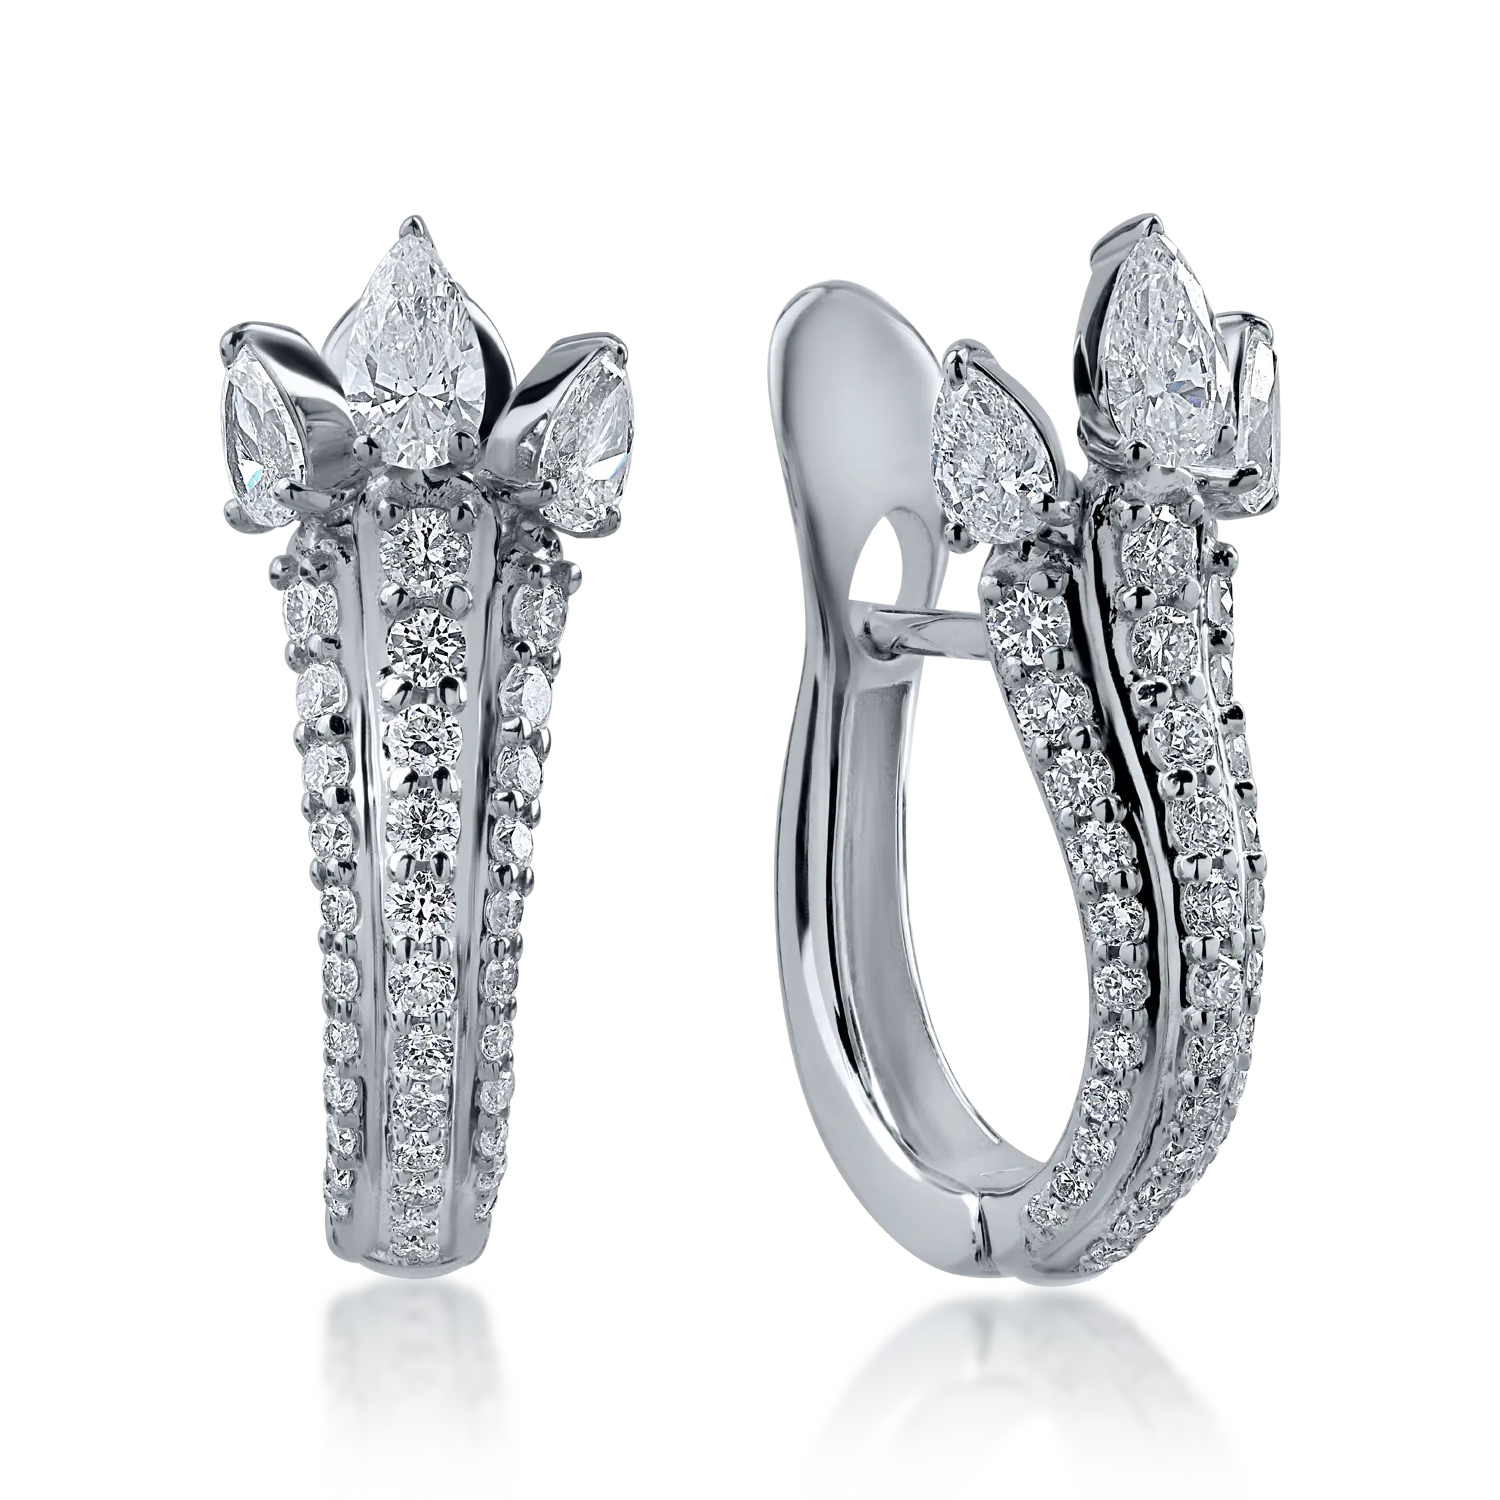 White gold earrings with 1.45ct diamonds